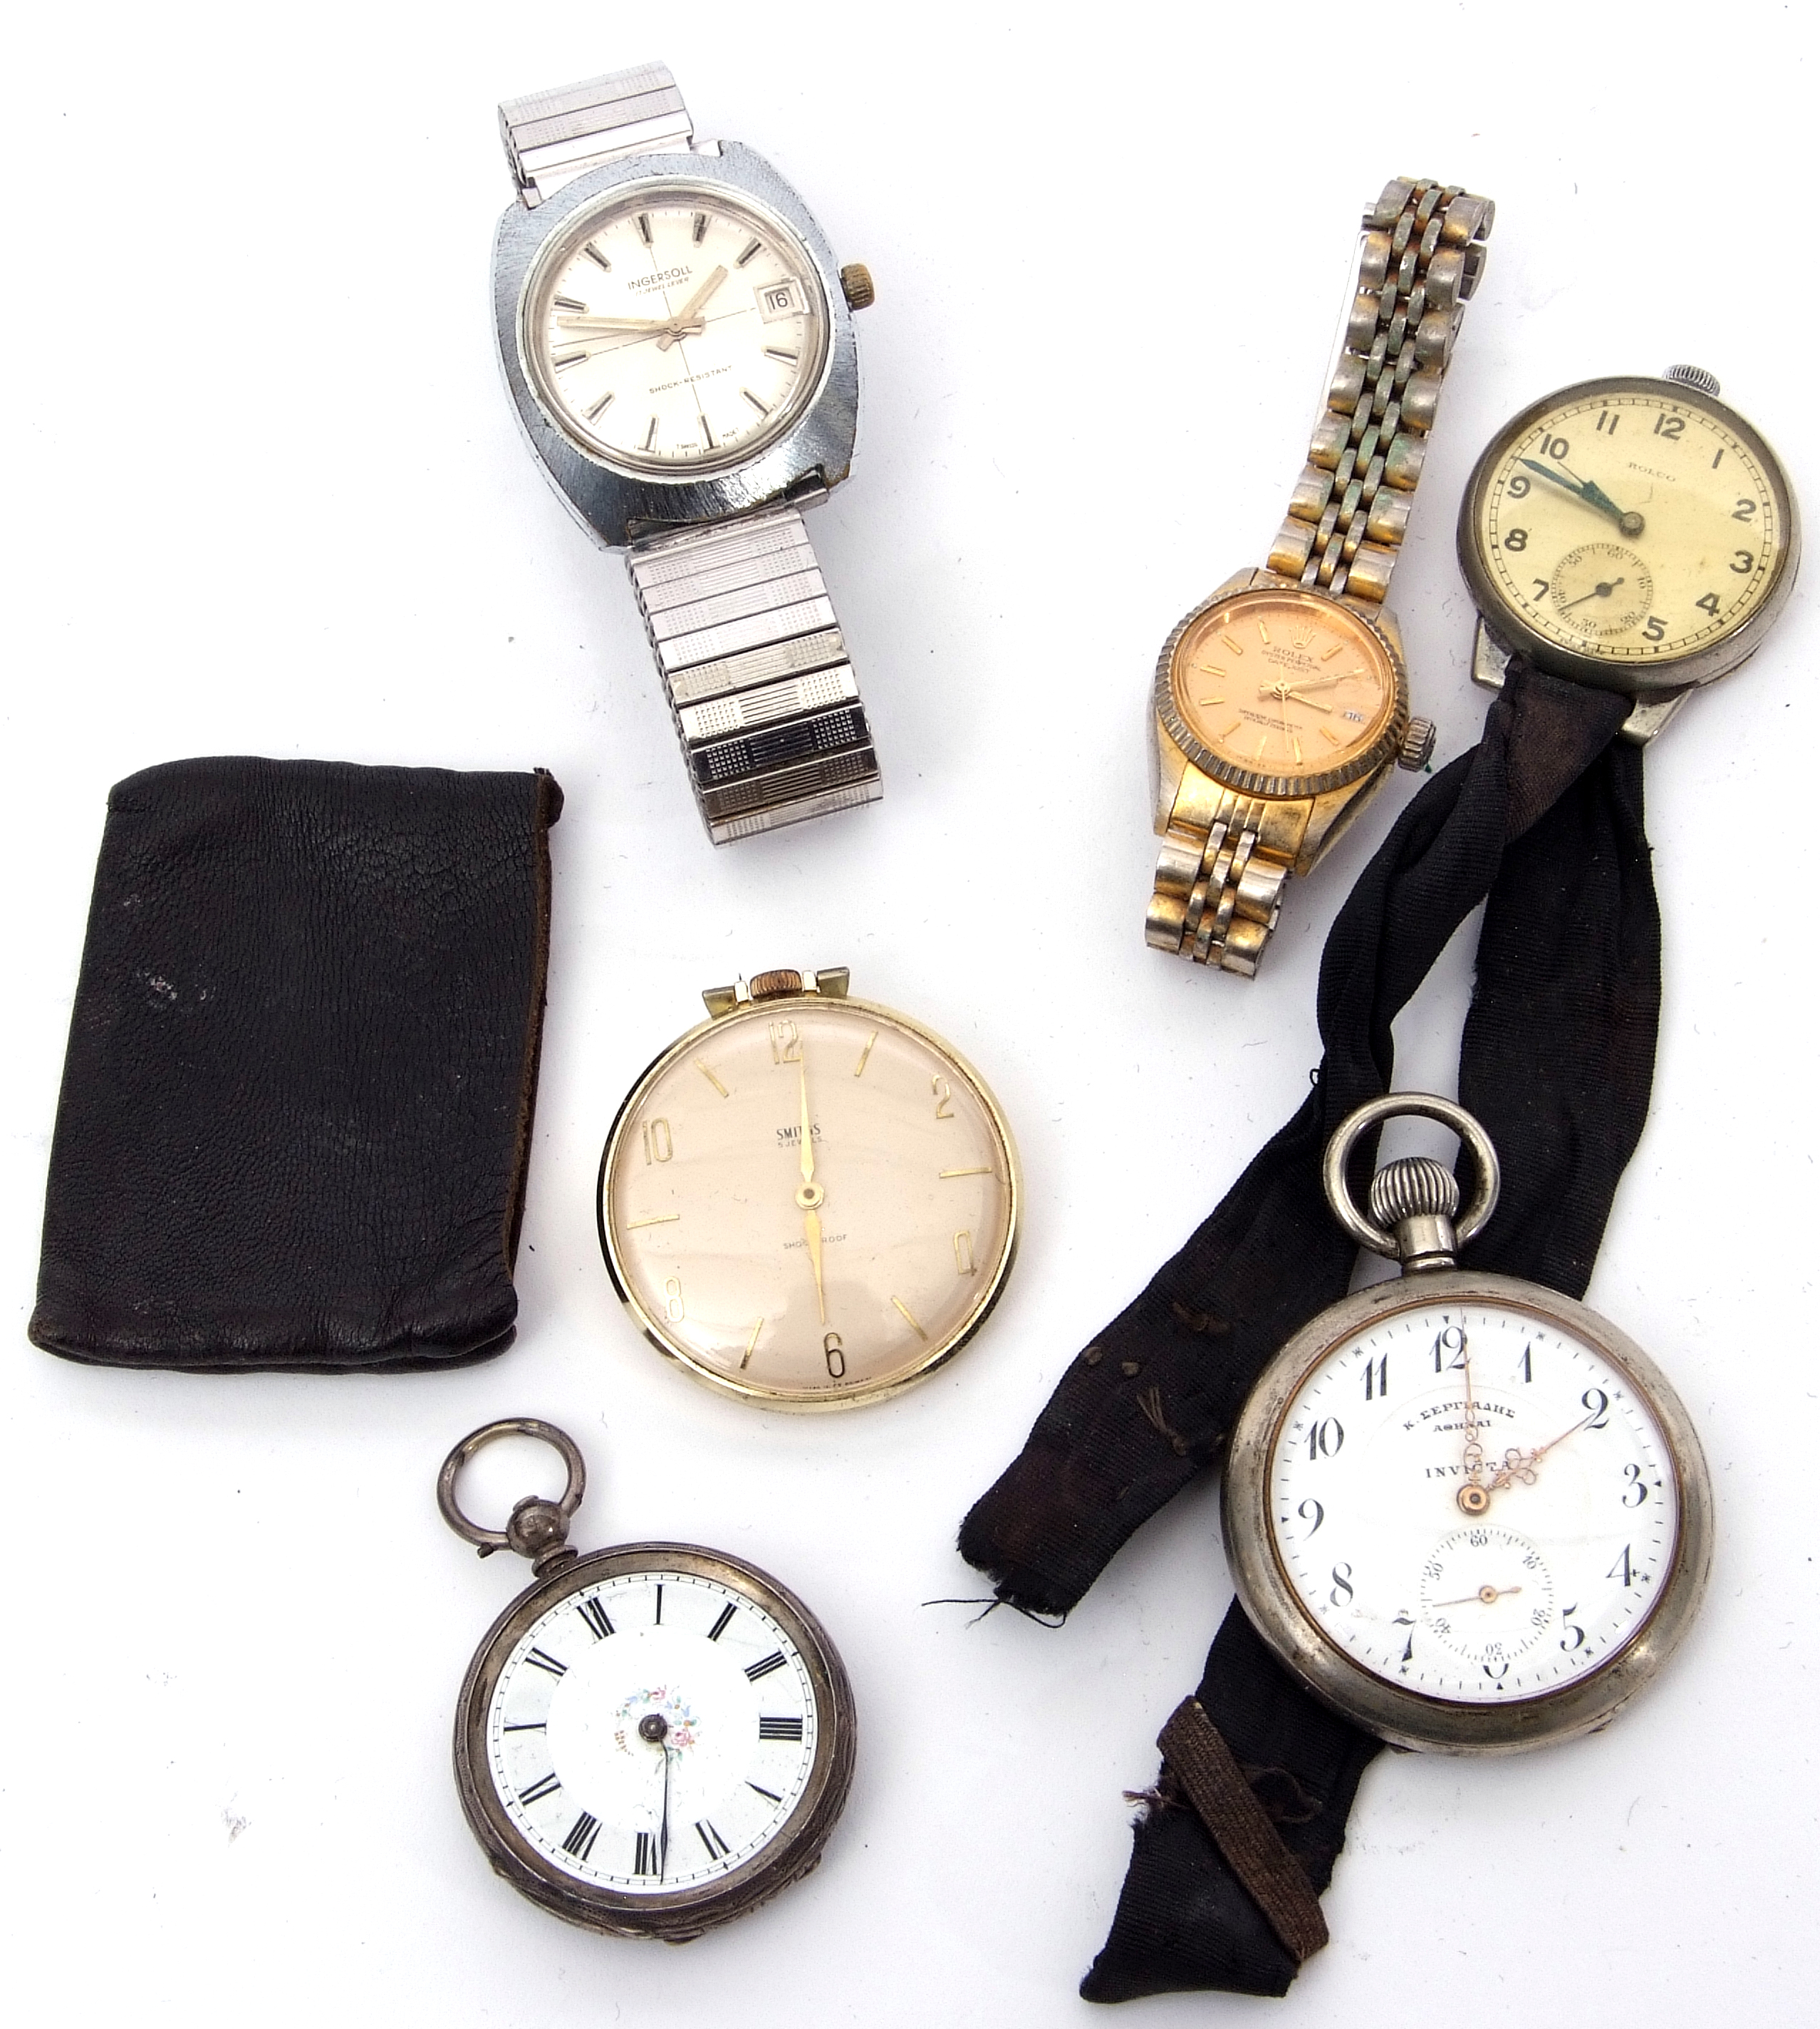 Mixed Lot: Continental white metal cased fob watch (a/f), an early/mid-20th century Smiths gold